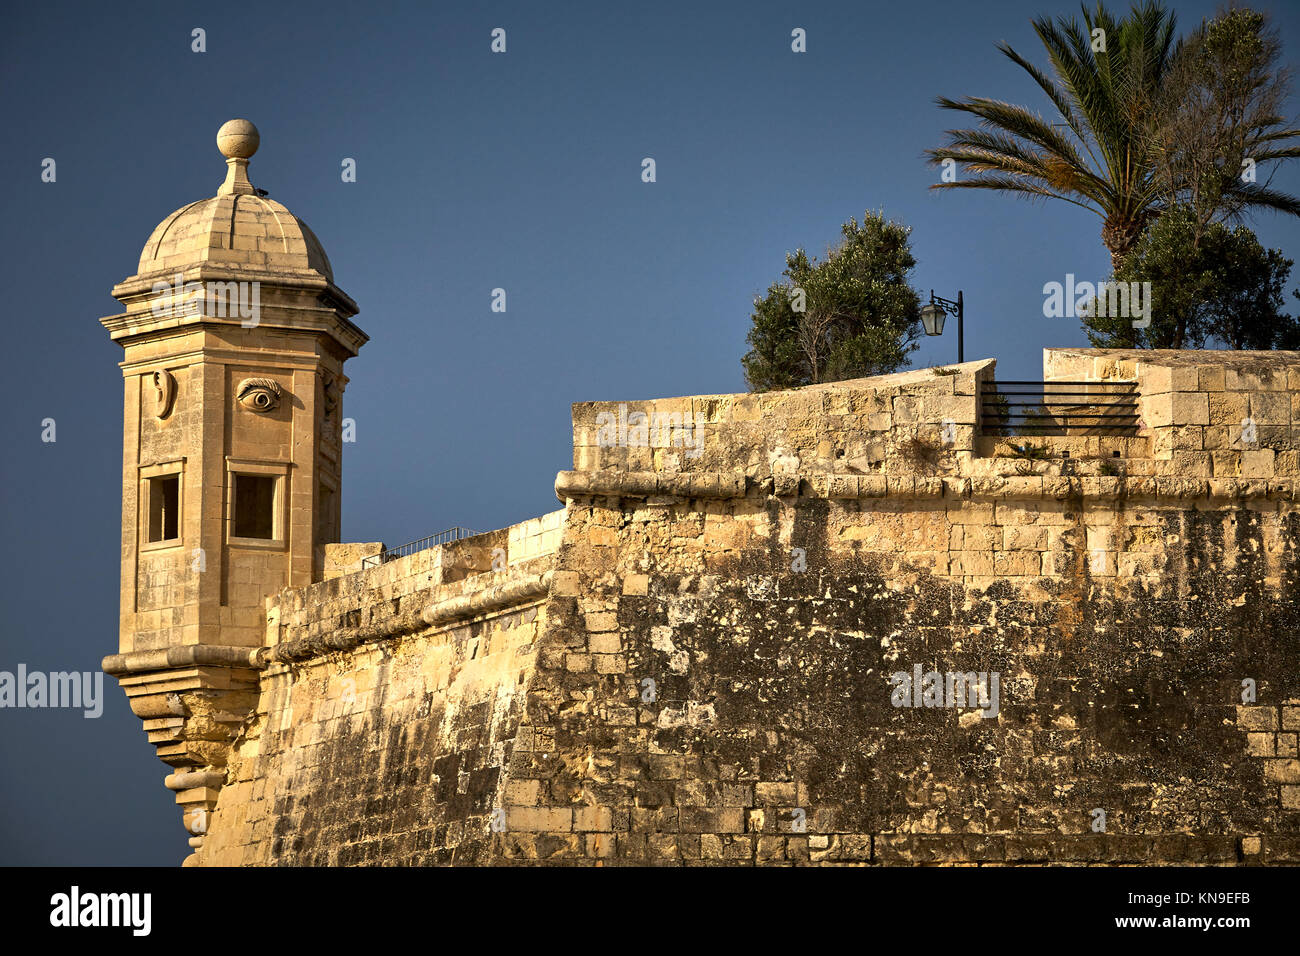 Images from Malta and Gozo Stock Photo